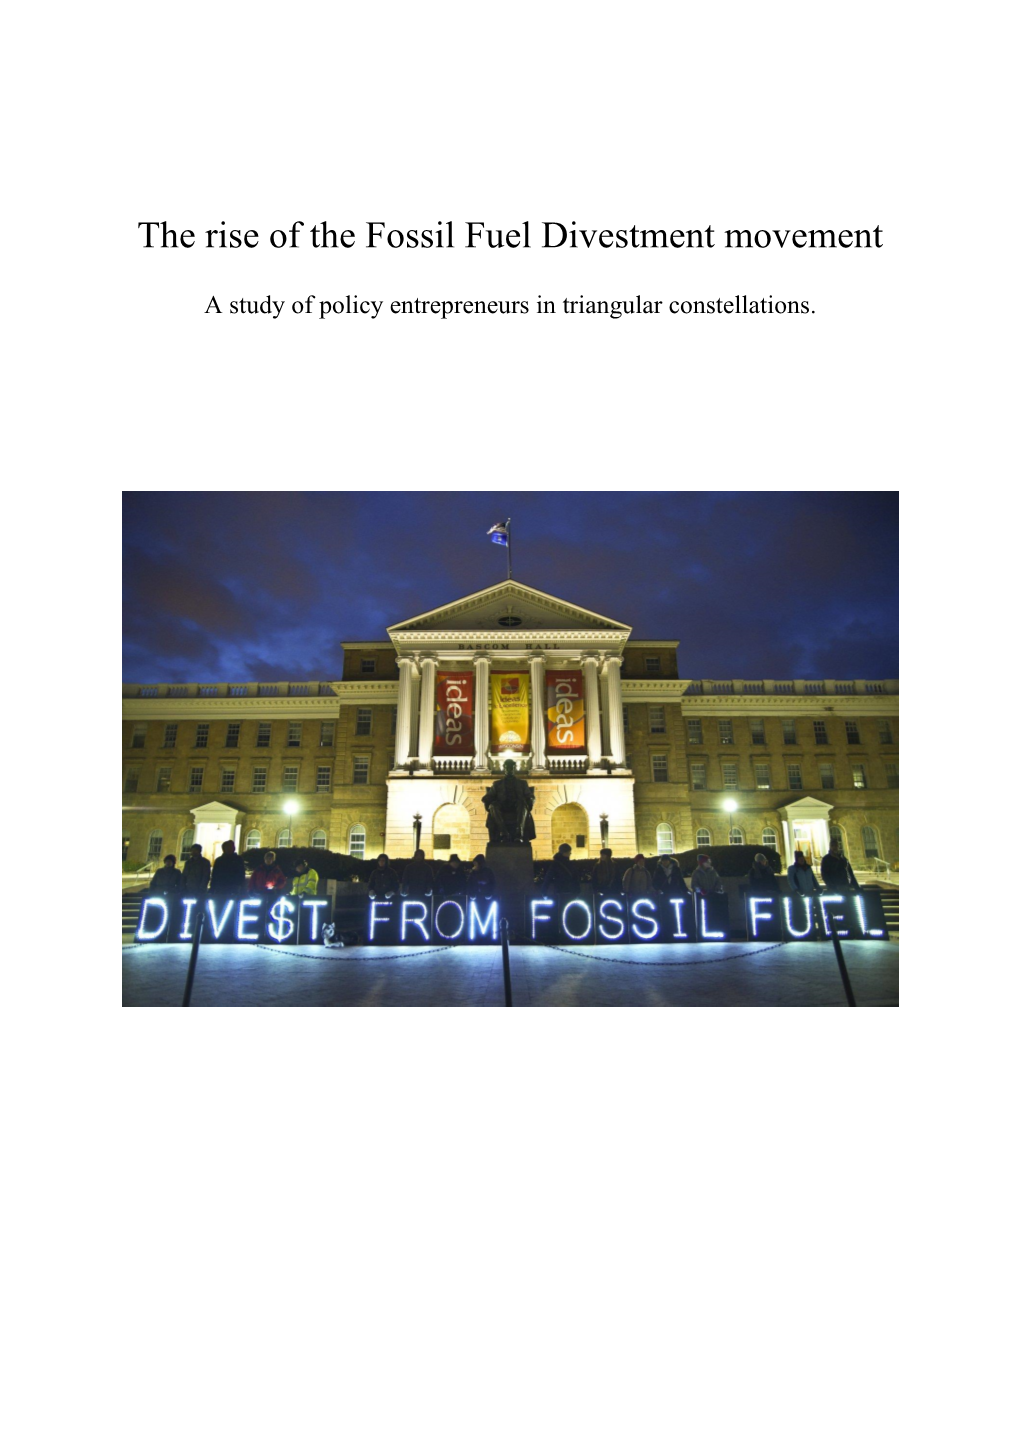 The Rise of the Fossil Fuel Divestment Movement